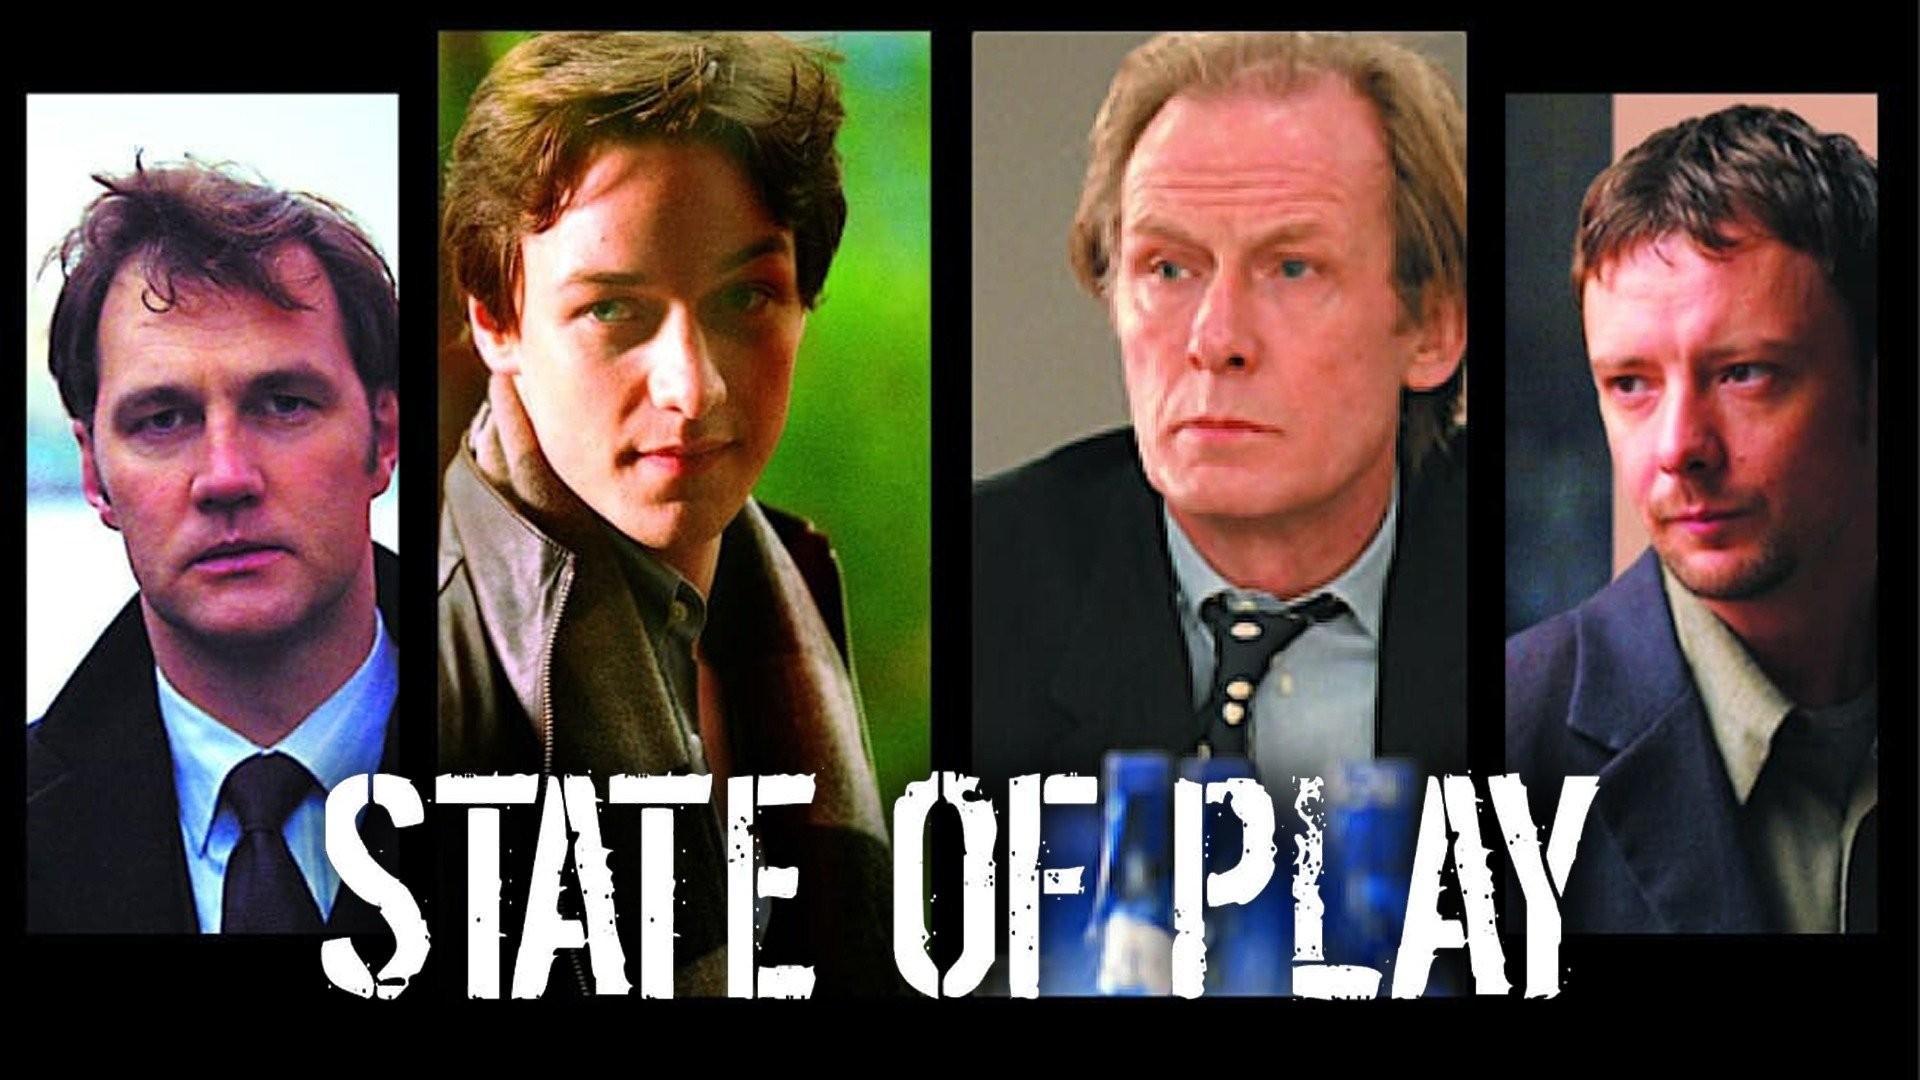 State of Play: who's who in the film adaptation of the BBC series, Film